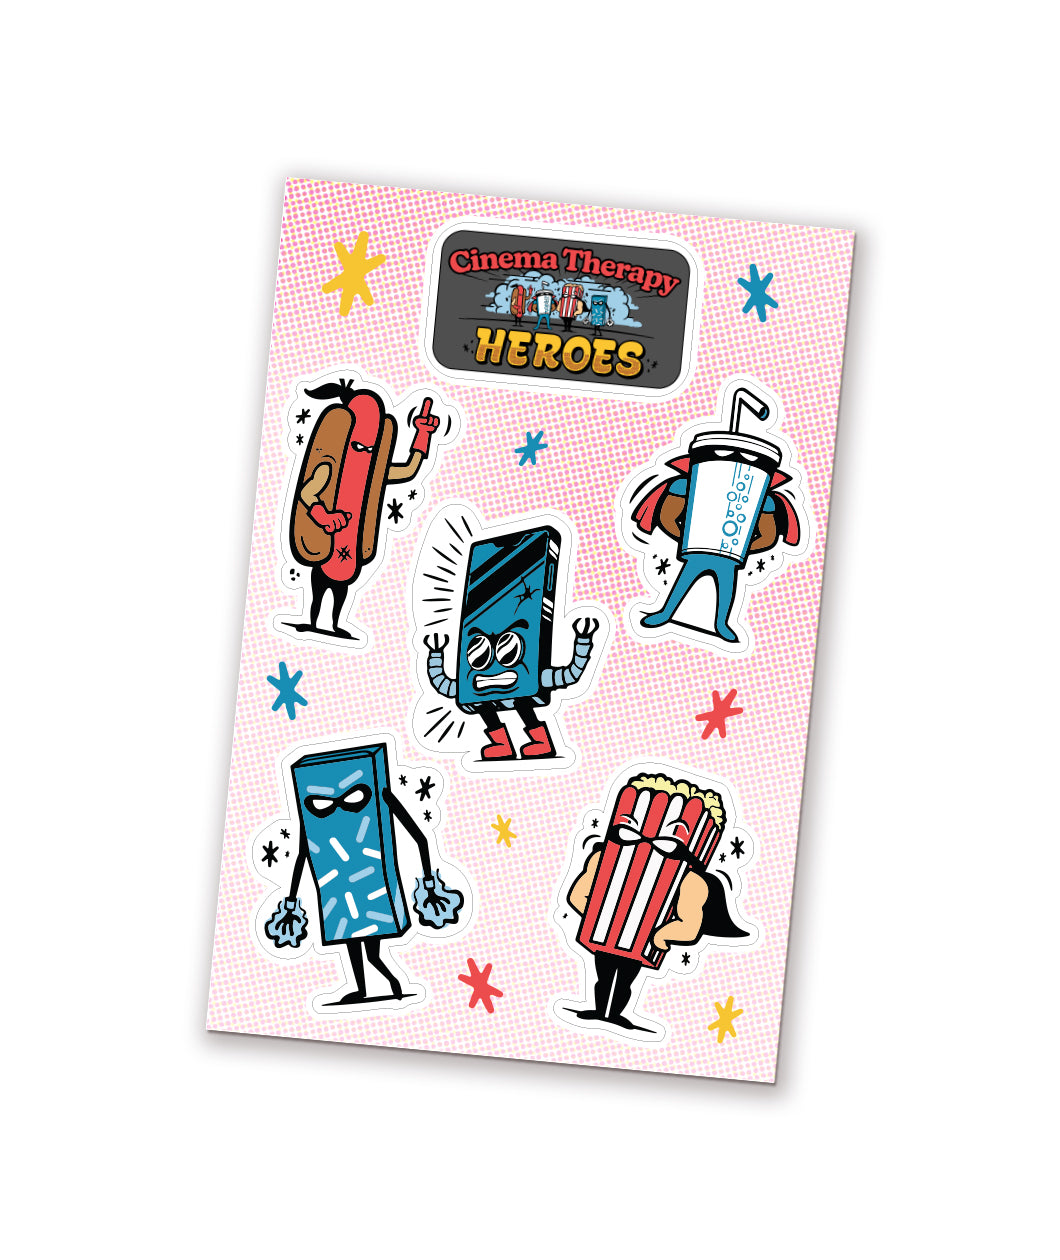 A sticker sheet featuring the characters of Cinema Therapy’s Heroes. From Cinema Therapy.